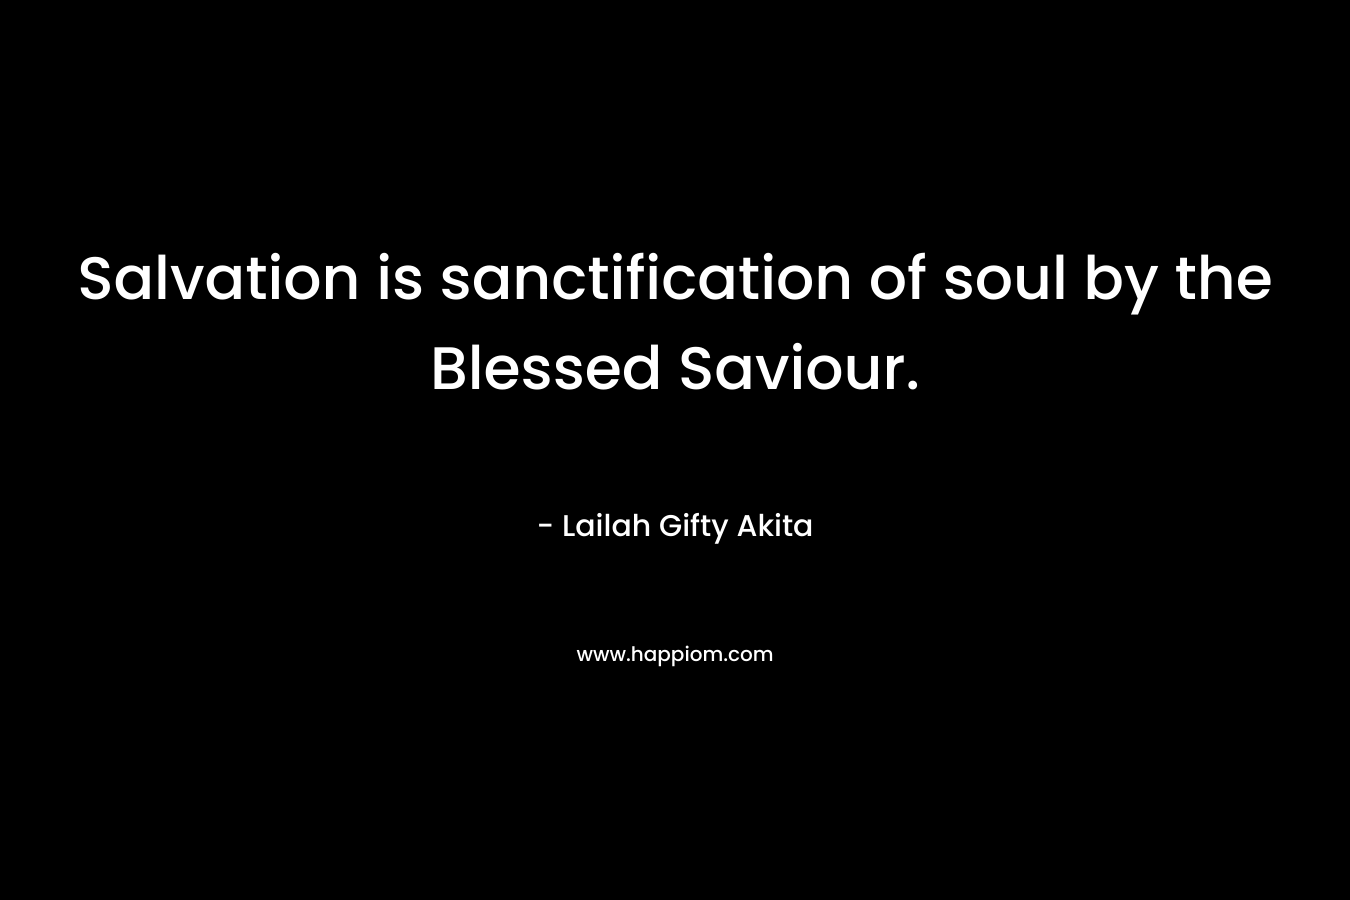 Salvation is sanctification of soul by the Blessed Saviour. – Lailah Gifty Akita